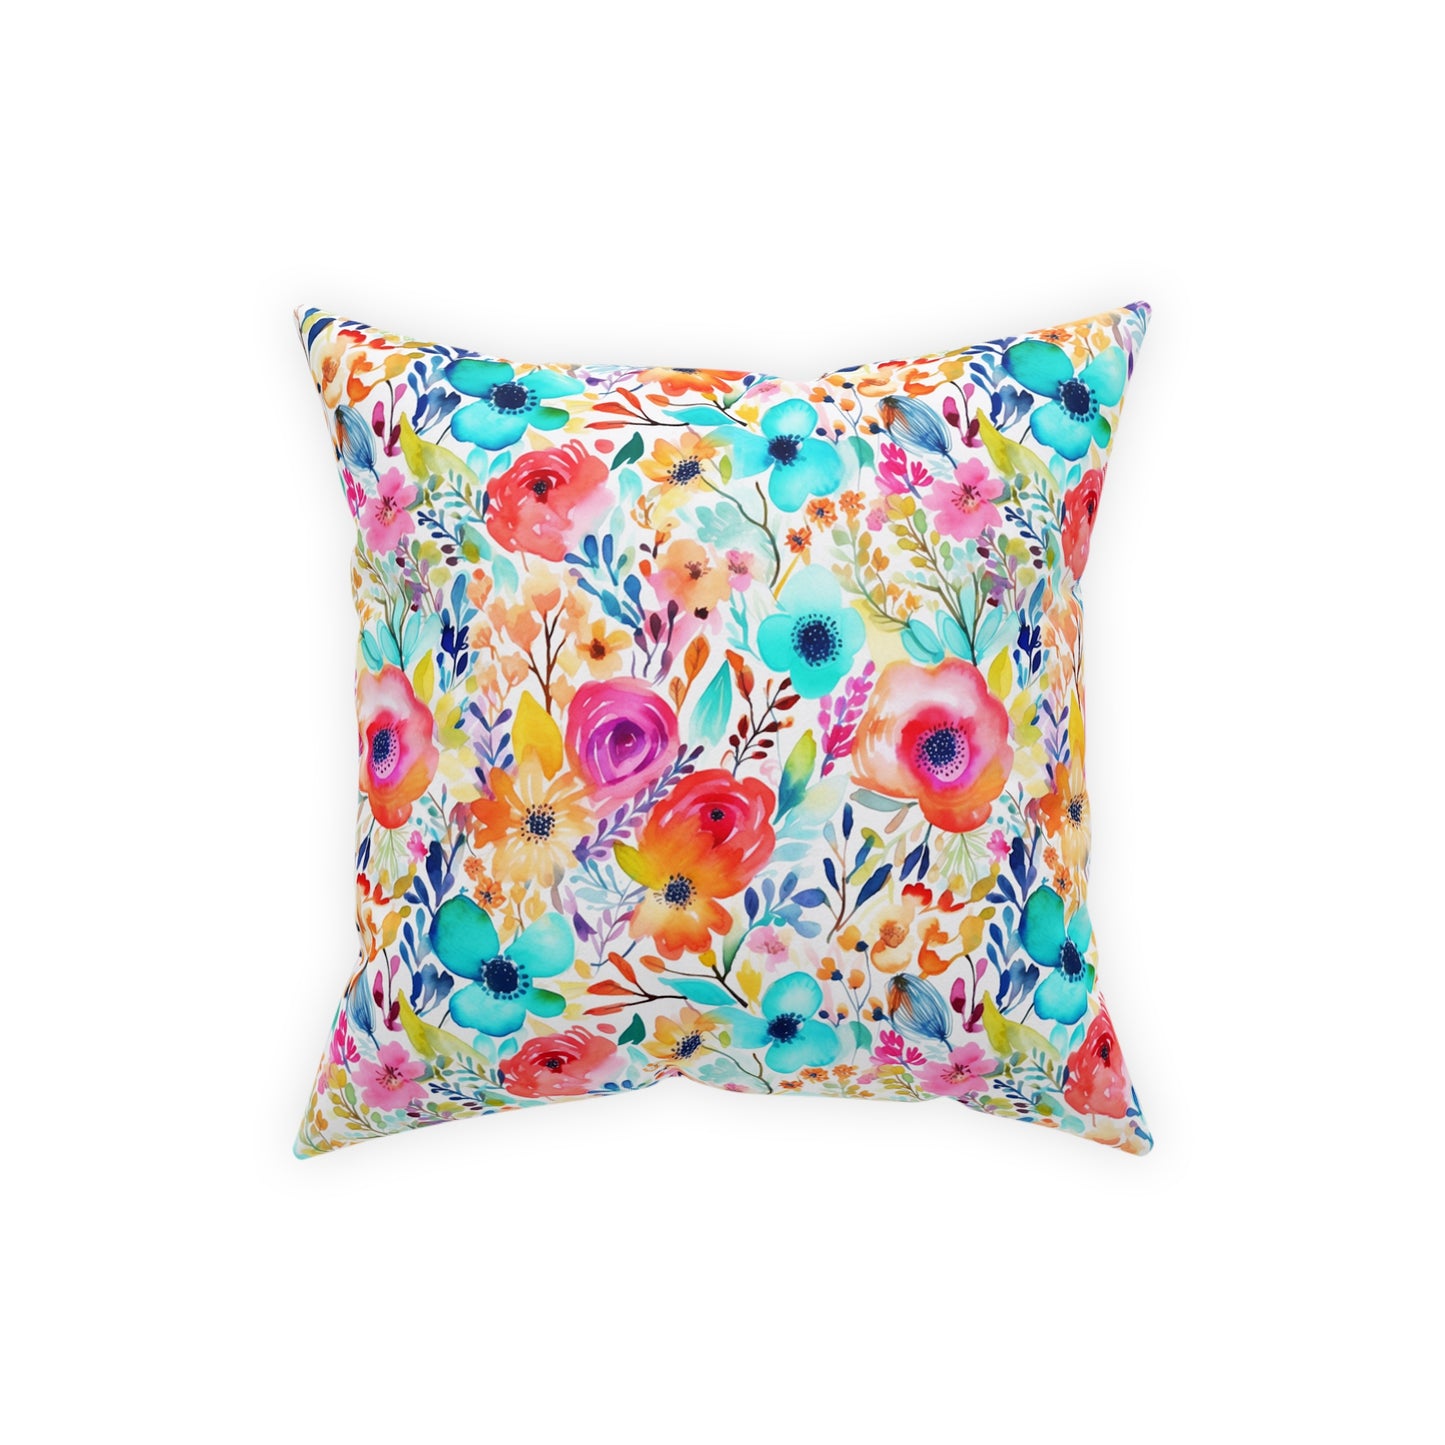 Colorful Flower Throw Pillow, Watercolor Wildflowers, Housewarming Gift, Wedding Gift, Abstract Paint - Design Club Home